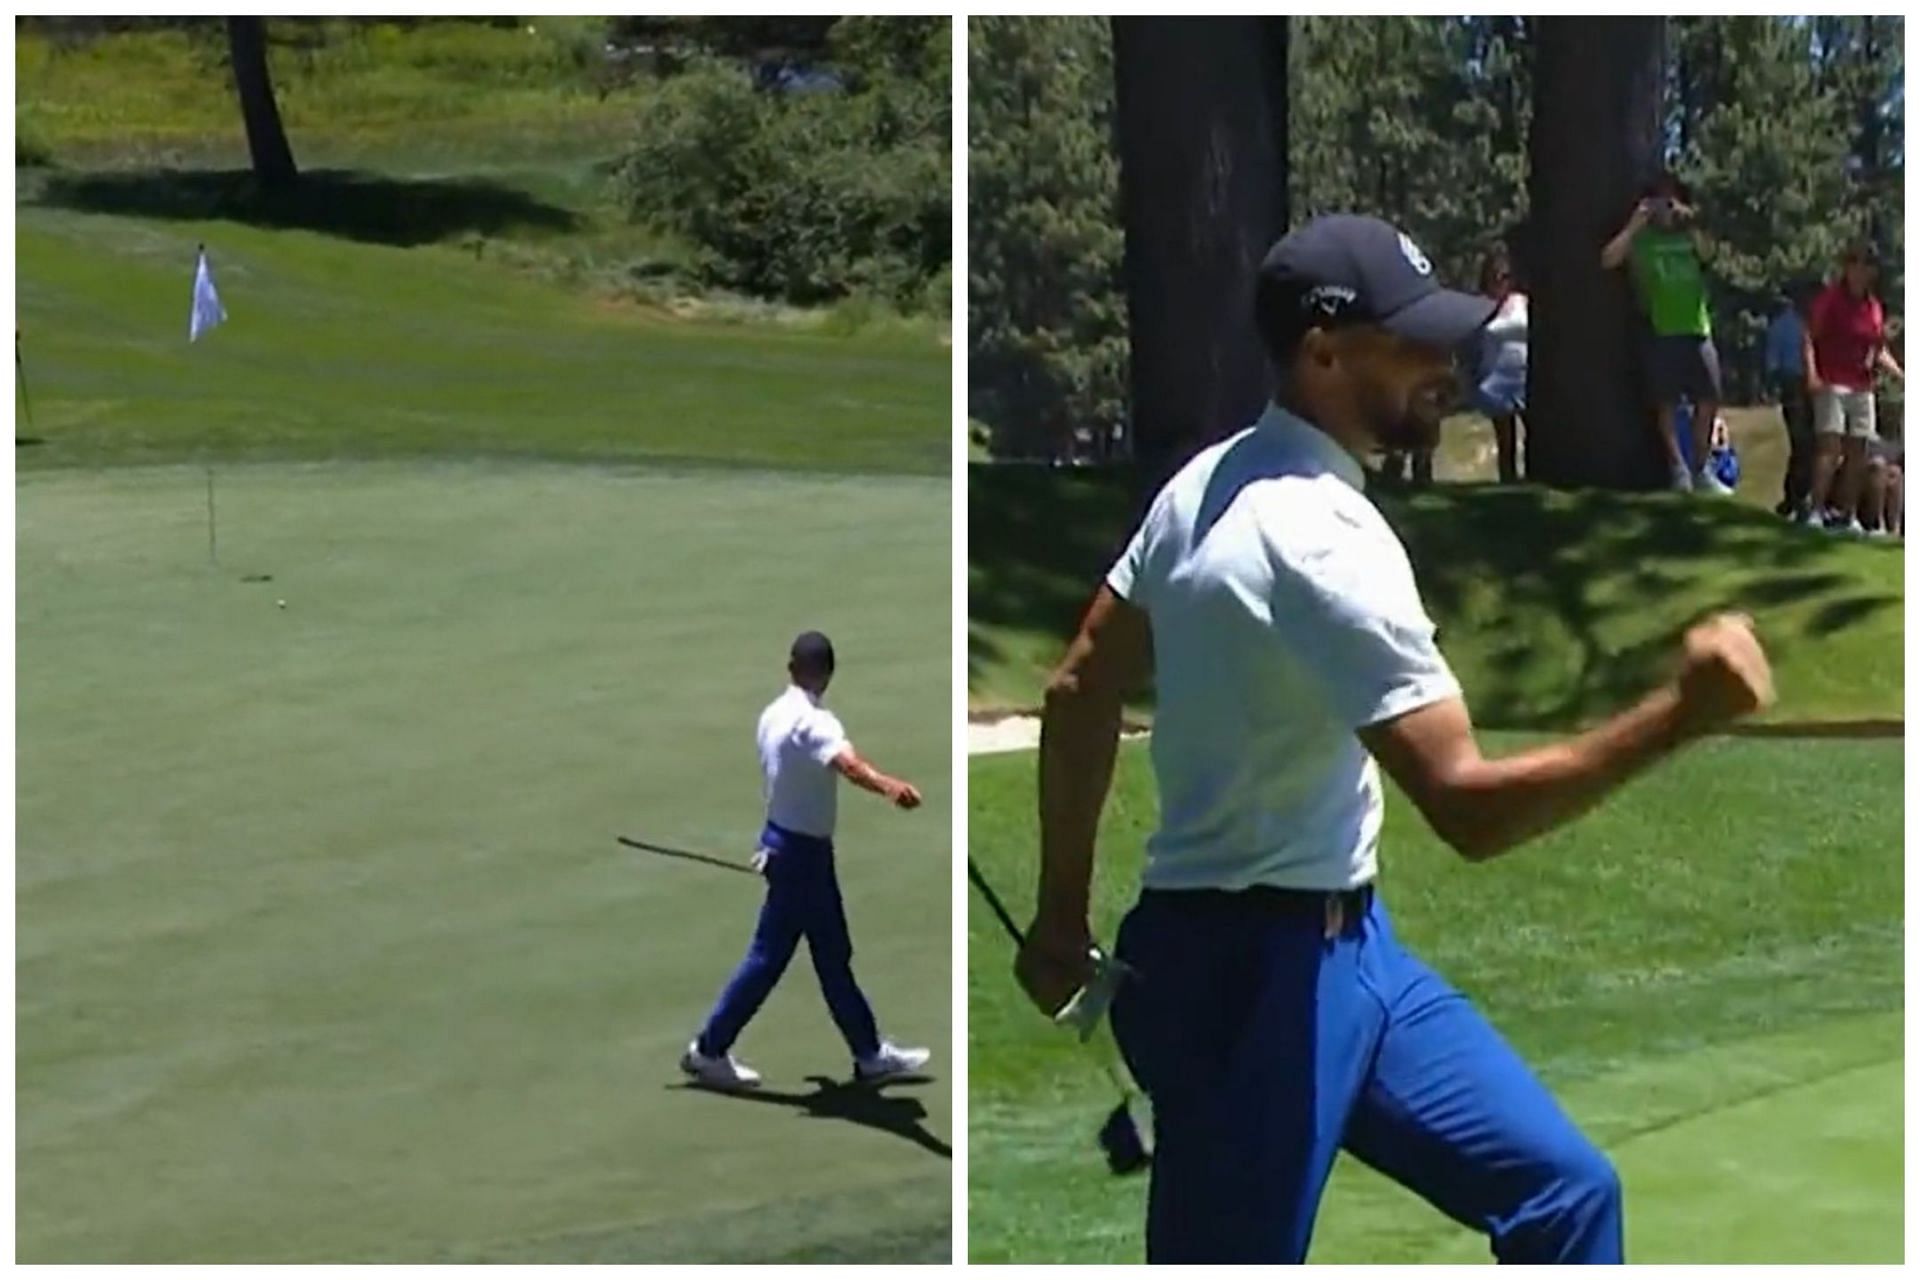 Steph Curry makes a no look birdie putt at the American Century Championship (Image via Peacock)